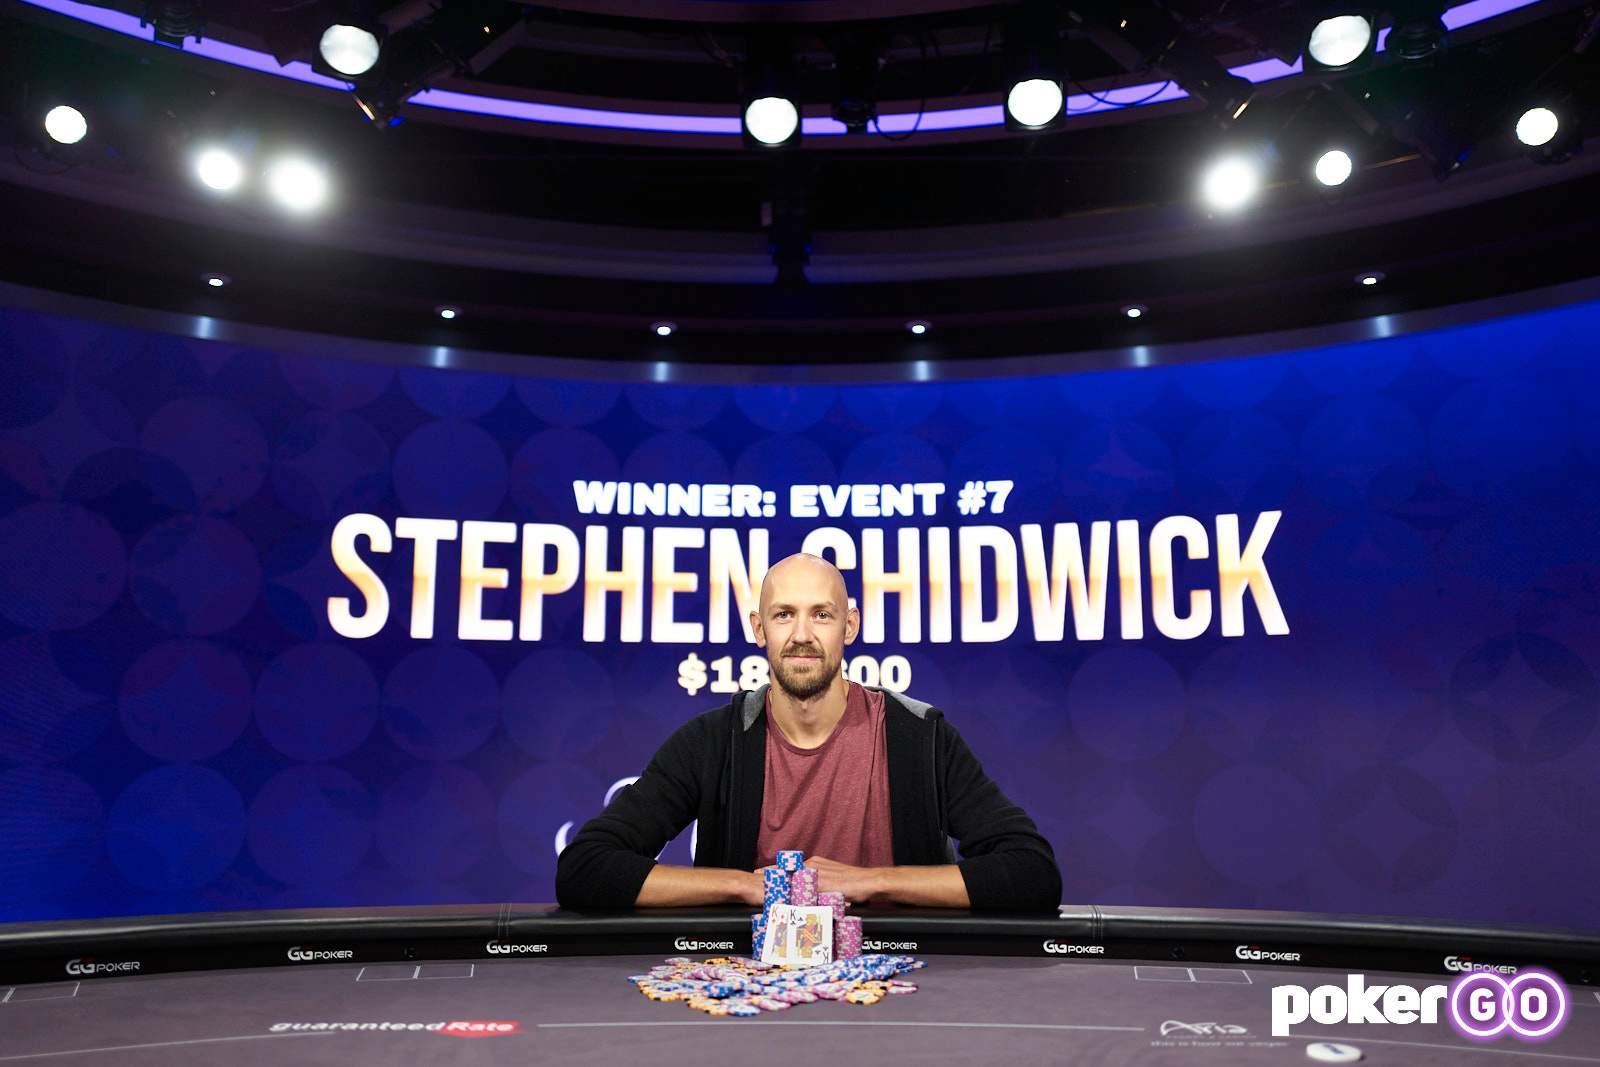 Stephen Chidwick Wins Event #7: $10,000 NL Hold’em at the 2021 Poker Masters for $183,600